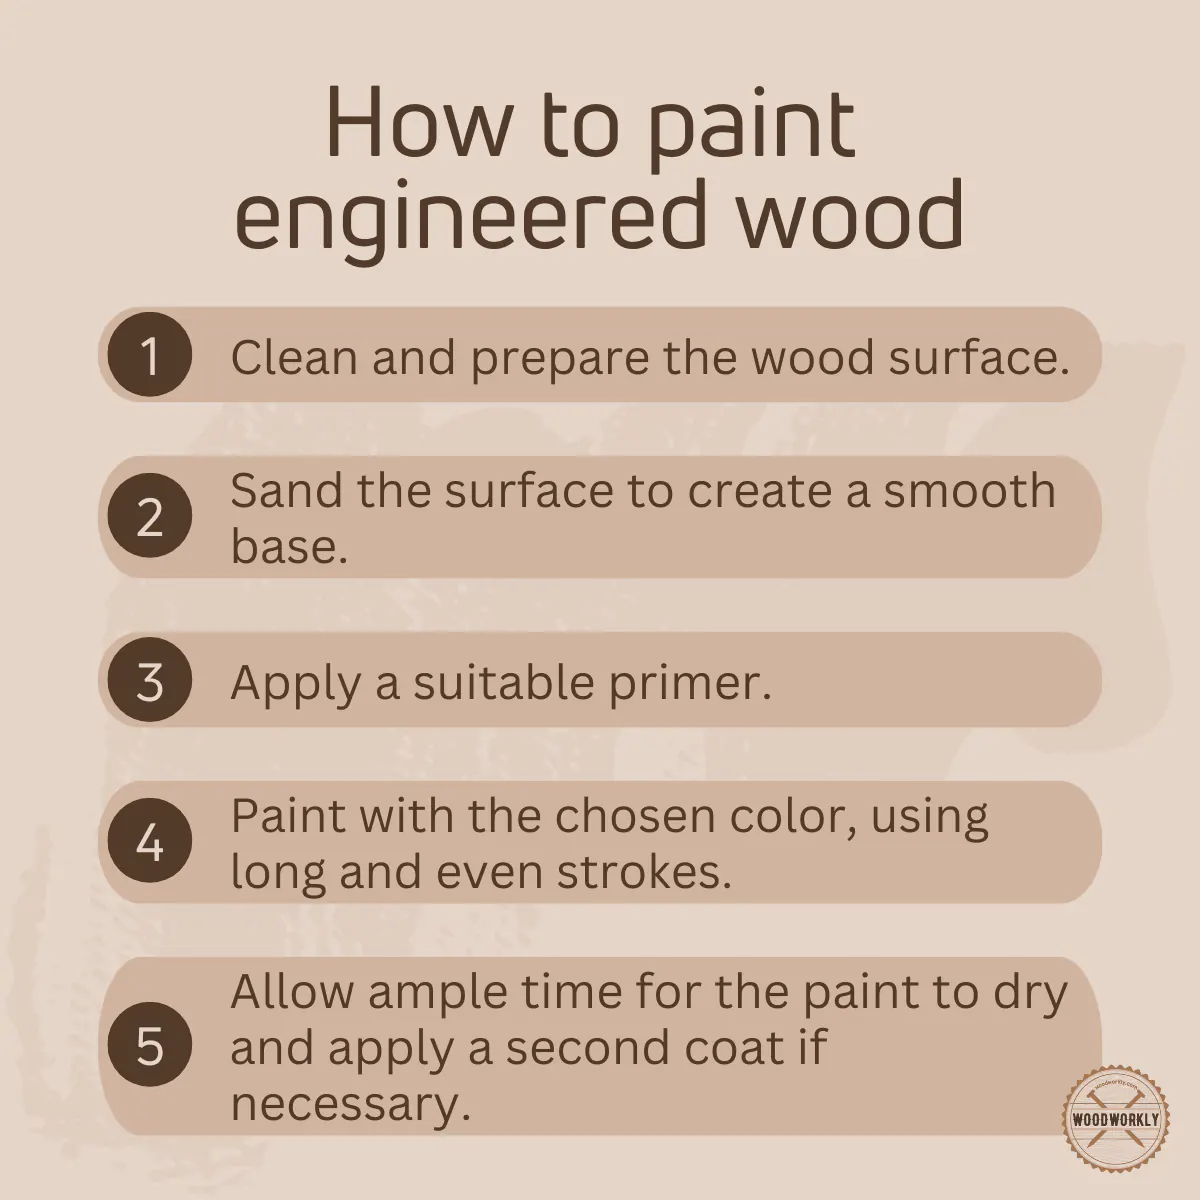 How to paint engineered wood